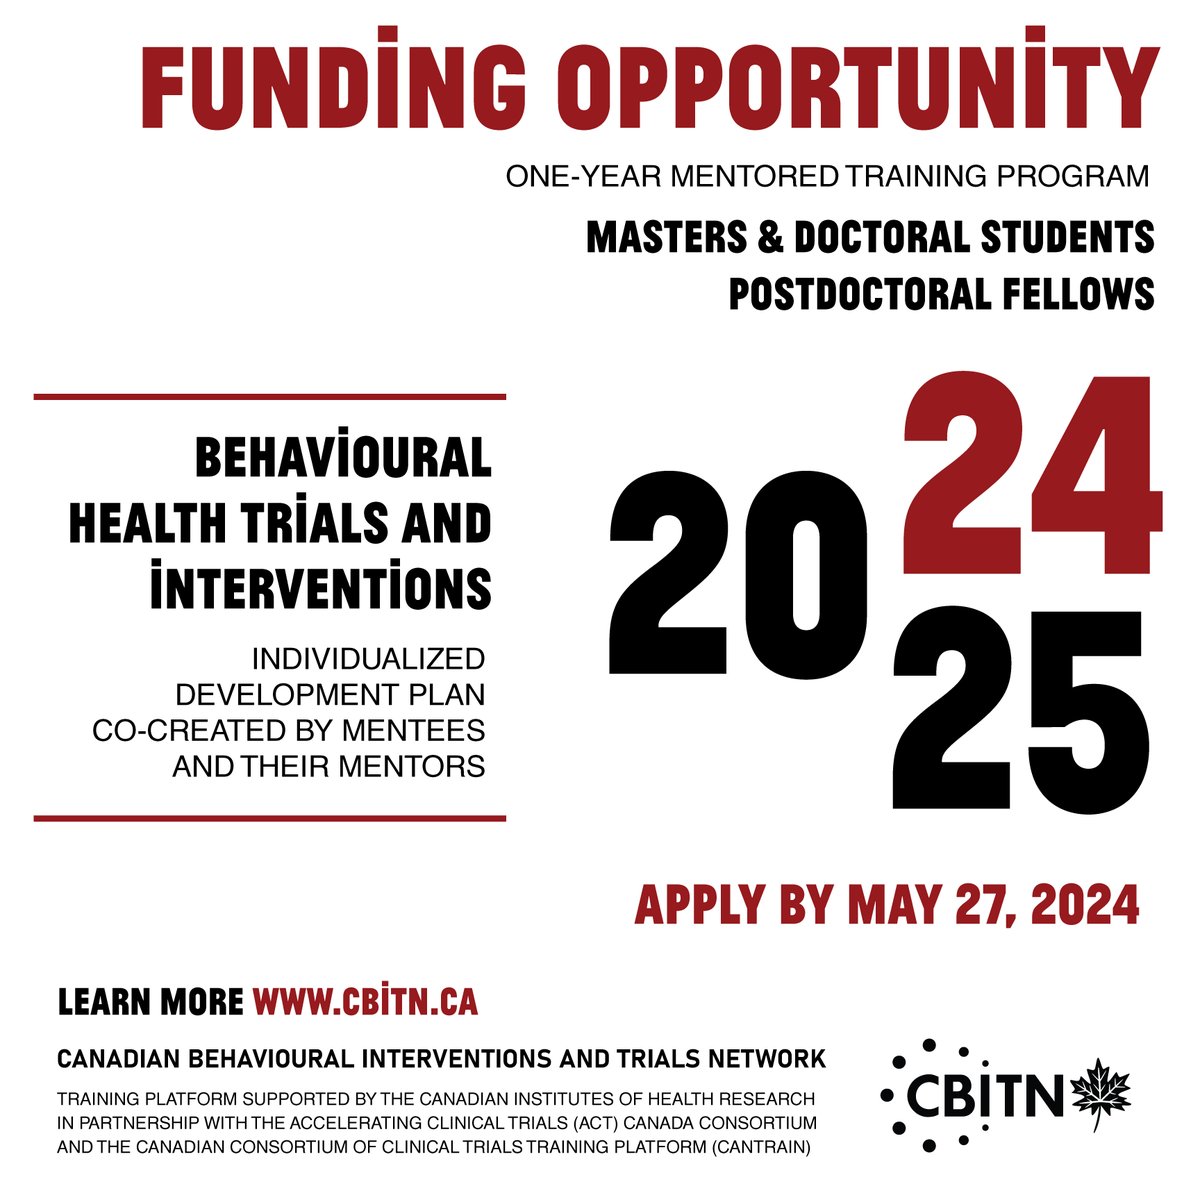 It's time! Apply to become a CBITN mentee for 2024-25! Be part of Canada's next generation of leaders in behavioural medicine! Learn more: cbitn.ca/training-awards Apply by May 27 Behavioural medicine is #behaviourchange #health #exercise #nutrition #medicine #interventions